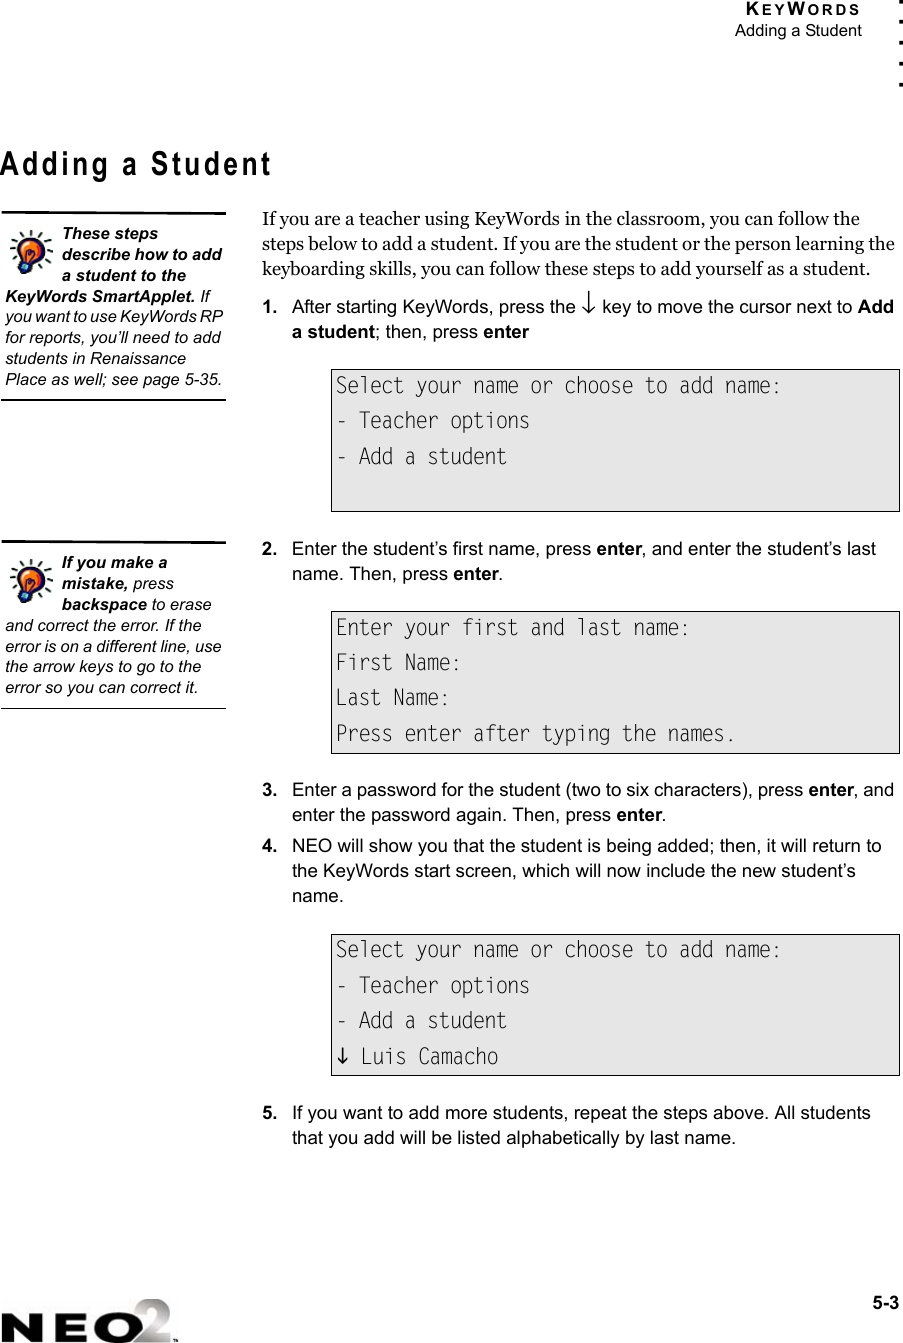 KEYWORDSAdding a Student5-3. . . . .Adding a StudentIf you are a teacher using KeyWords in the classroom, you can follow the steps below to add a student. If you are the student or the person learning the keyboarding skills, you can follow these steps to add yourself as a student.1. After starting KeyWords, press the ↓ key to move the cursor next to Add a student; then, press enter2. Enter the student’s first name, press enter, and enter the student’s last name. Then, press enter.3. Enter a password for the student (two to six characters), press enter, and enter the password again. Then, press enter.4. NEO will show you that the student is being added; then, it will return to the KeyWords start screen, which will now include the new student’s name.5. If you want to add more students, repeat the steps above. All students that you add will be listed alphabetically by last name.Select your name or choose to add name:- Teacher options- Add a studentEnter your first and last name:First Name:Last Name:Press enter after typing the names.Select your name or choose to add name:- Teacher options- Add a studentL Luis CamachoThese steps describe how to add a student to the KeyWords SmartApplet. If you want to use KeyWords RP for reports, you’ll need to add students in Renaissance Place as well; see page 5-35.If you make a mistake, press backspace to erase and correct the error. If the error is on a different line, use the arrow keys to go to the error so you can correct it.